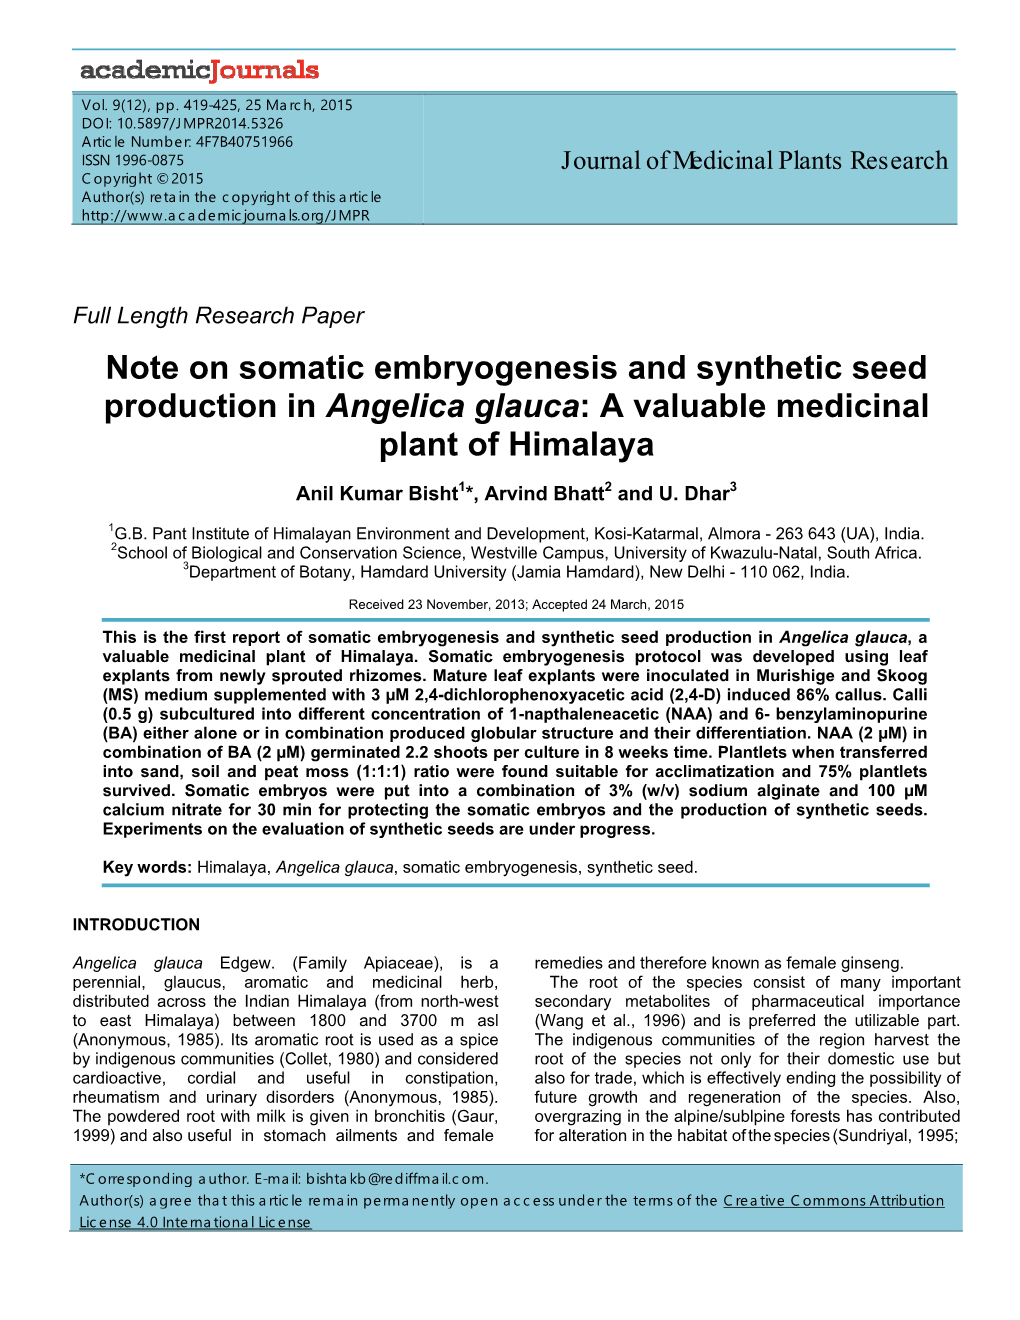 Note on Somatic Embryogenesis and Synthetic Seed Production in Angelica Glauca: a Valuable Medicinal Plant of Himalaya